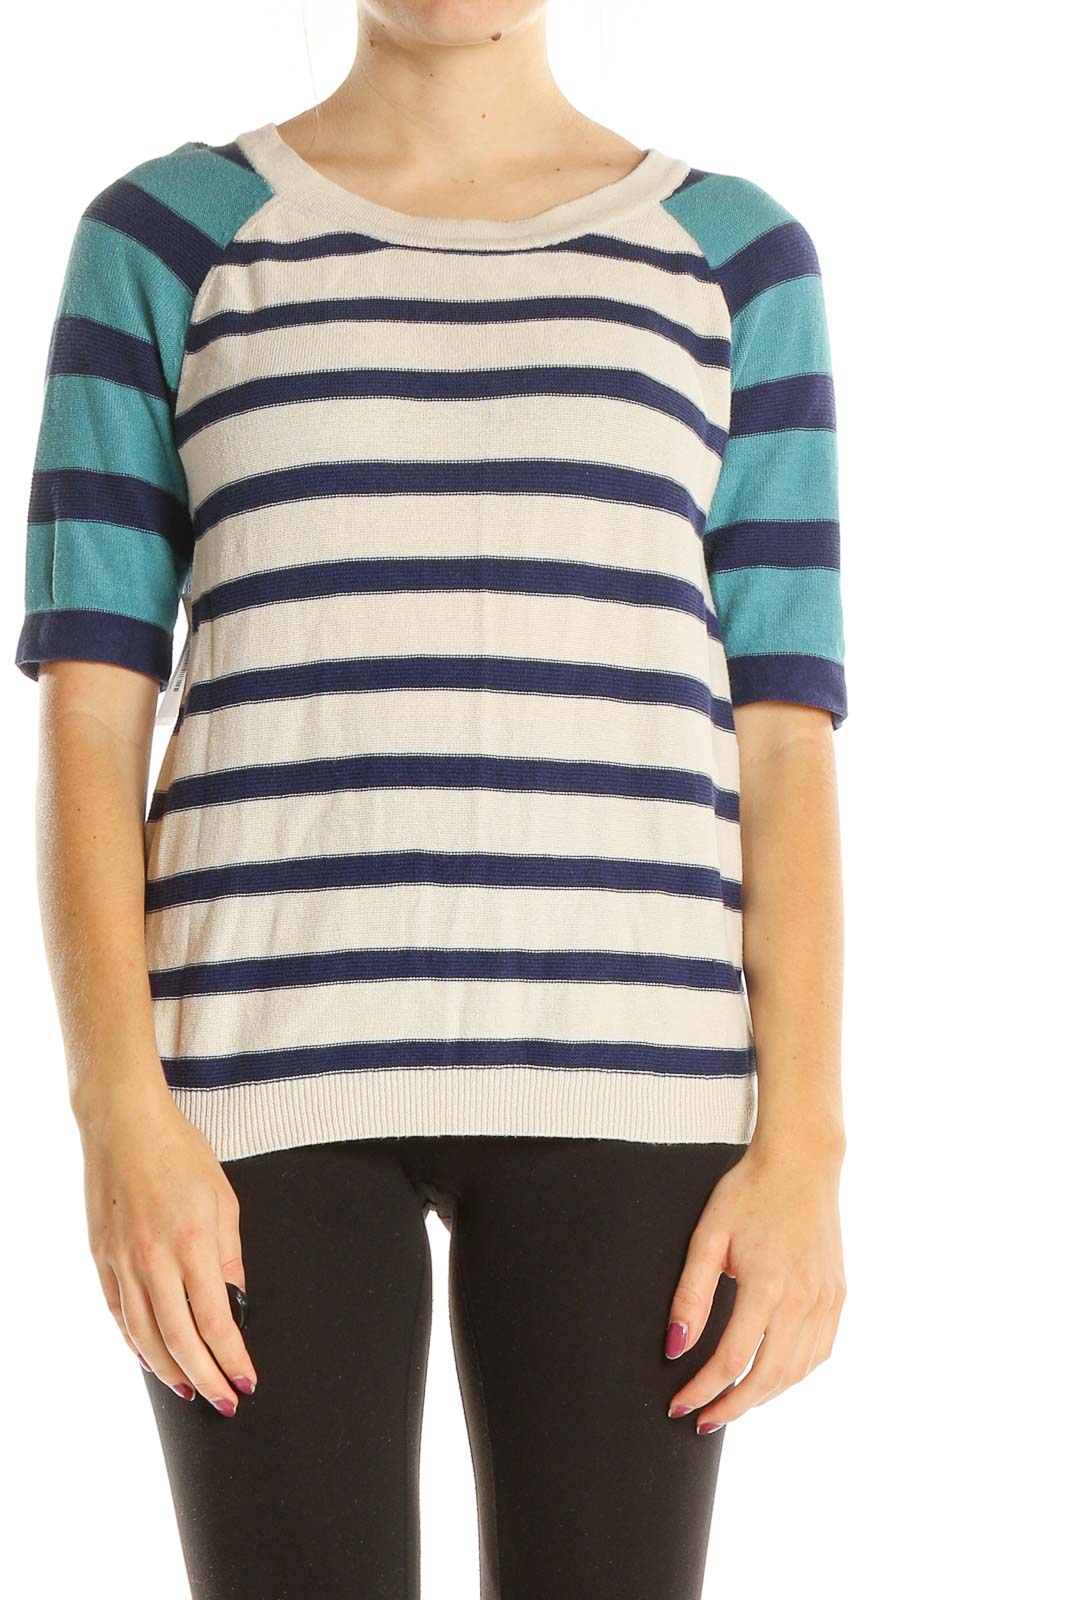 Blue White Striped Casual Sweater Front